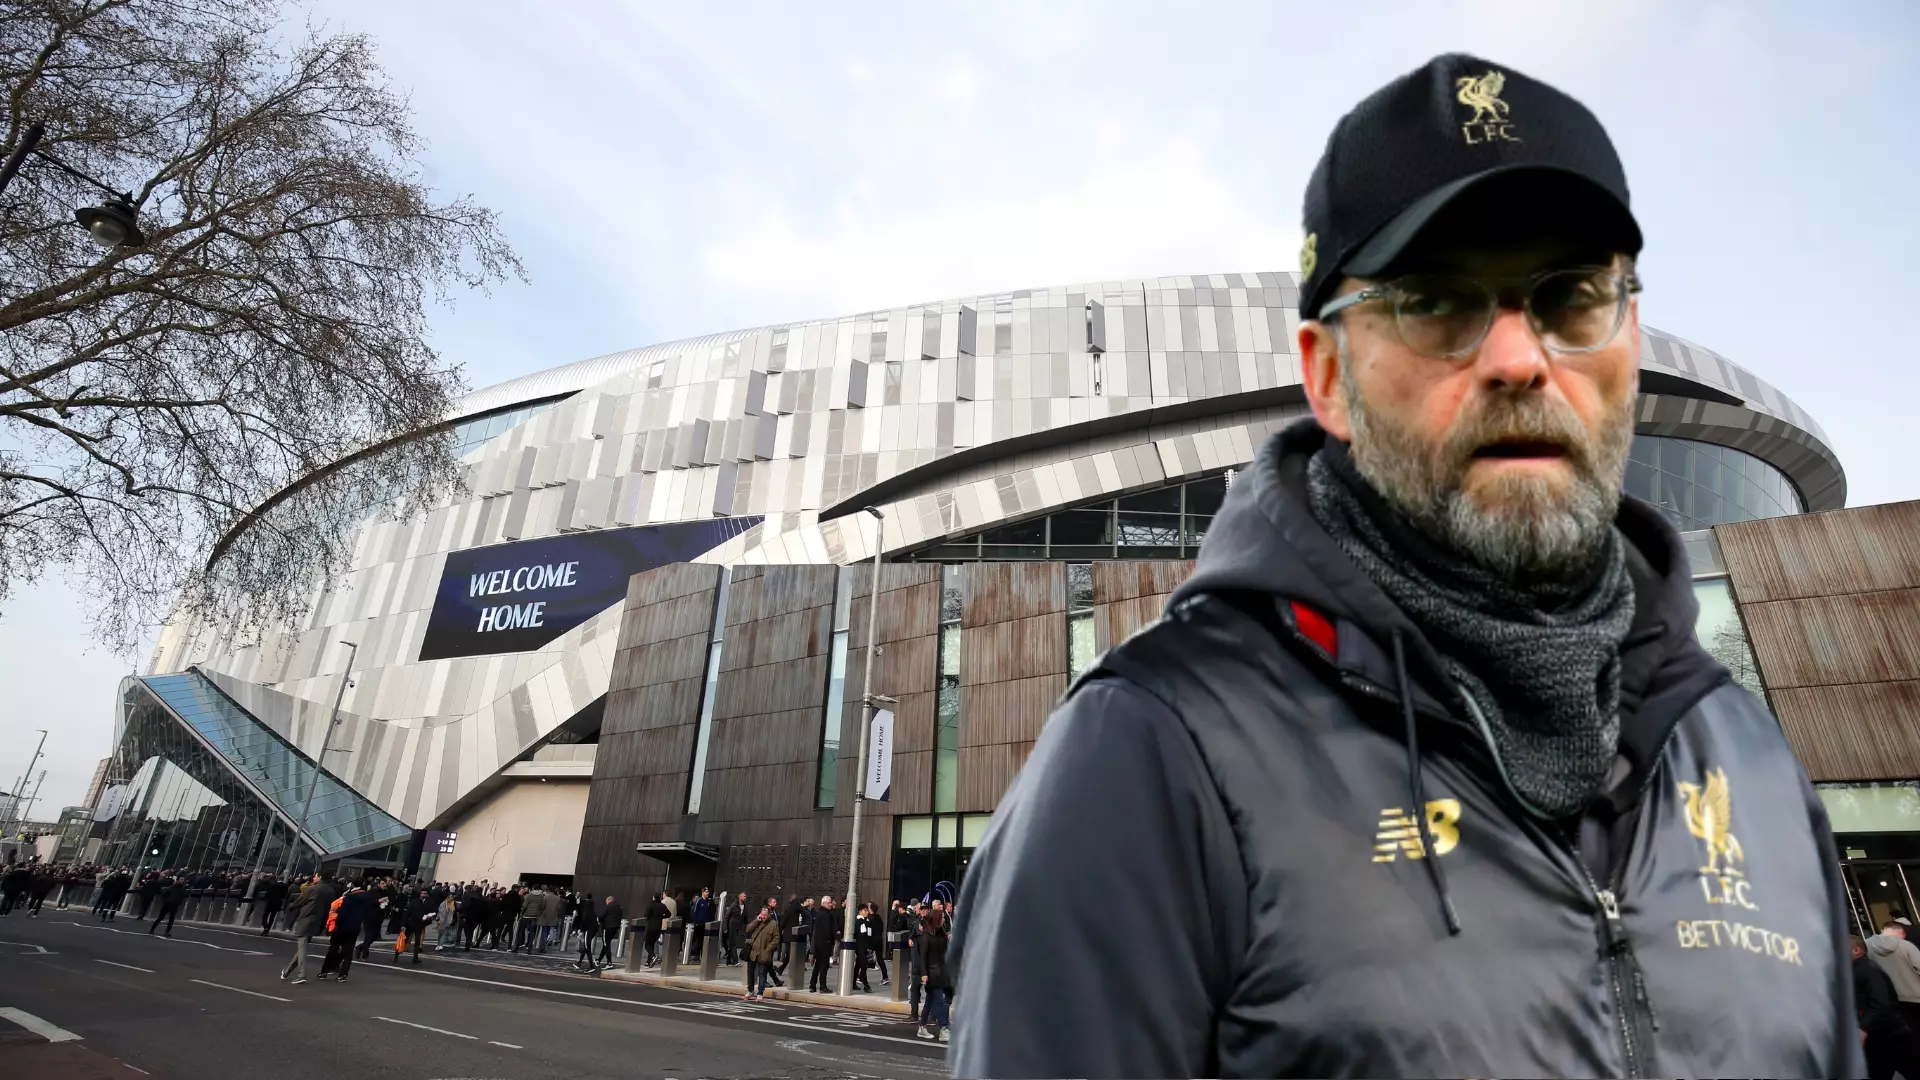 Liverpool Want To Play A Friendly Match At Spurs' New Stadium Against Napoli